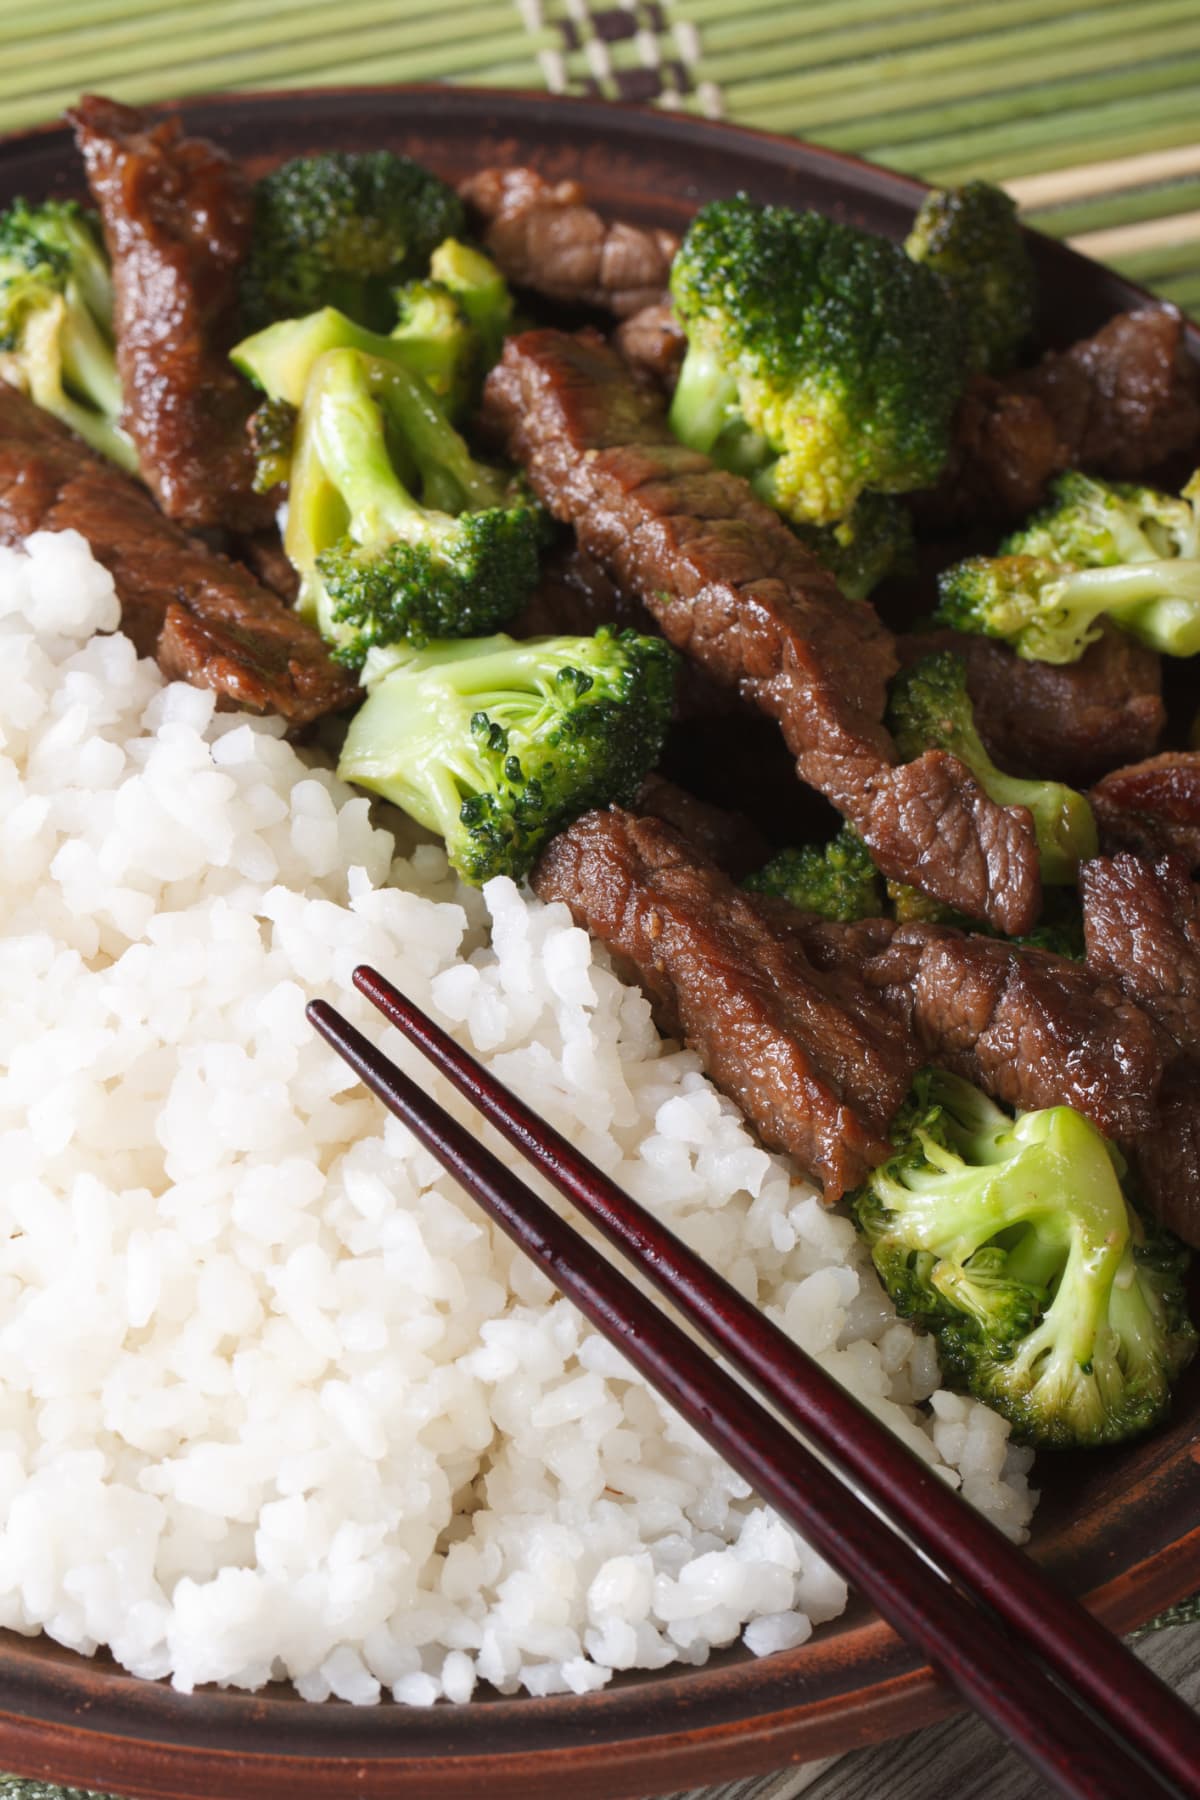 Pieces of beef with broccoli and rice on a plate with chopsticks